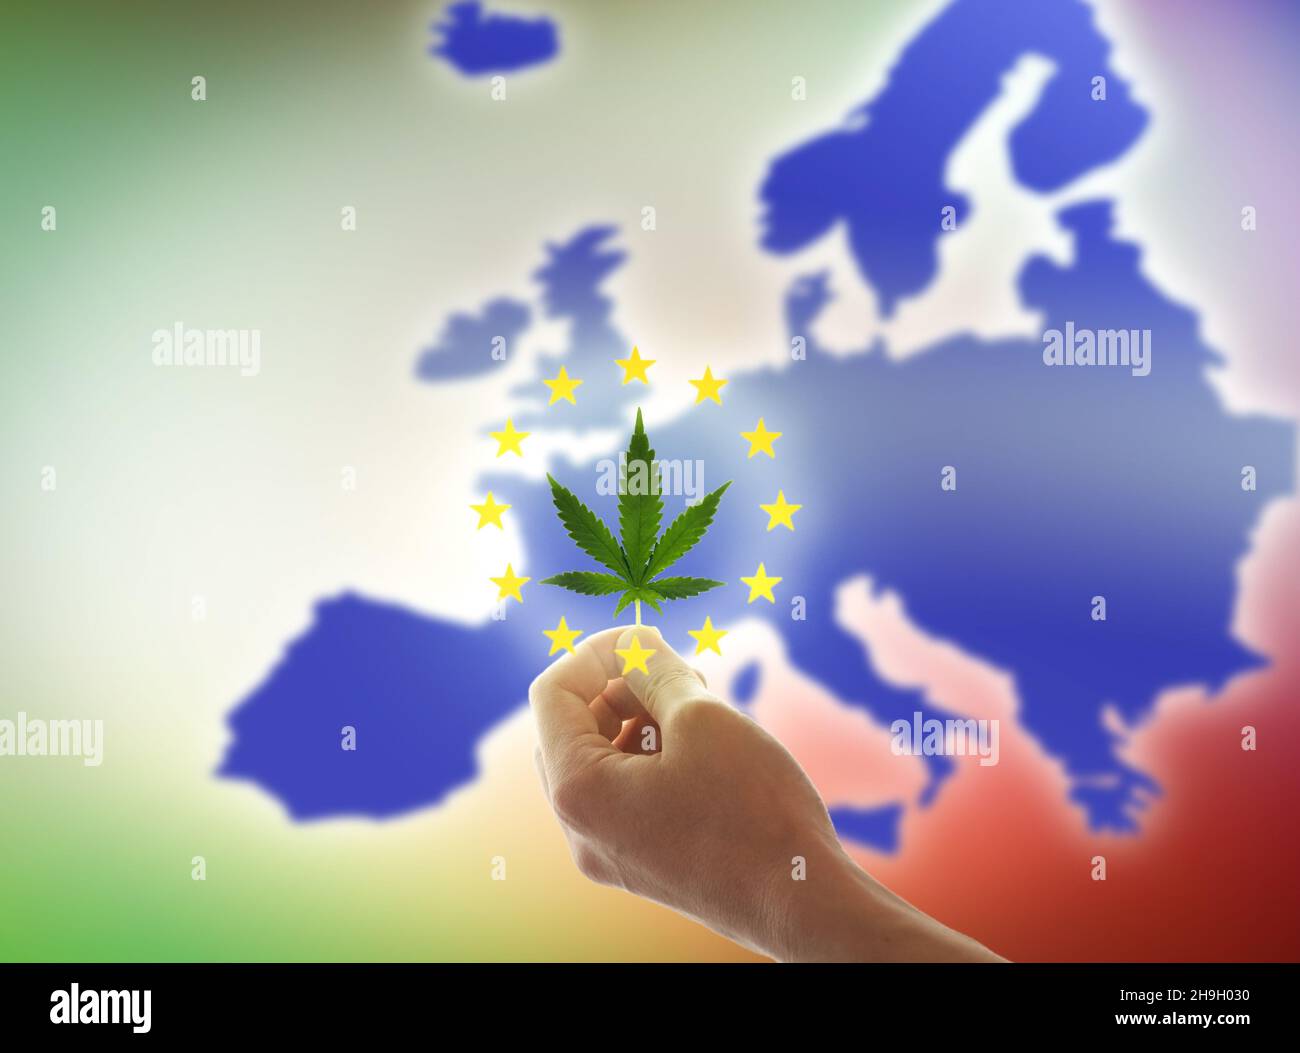 A woman's hand holds a cannabis leaf against the background of the EU flag. The concept of cannabis legalization in Europe Stock Photo